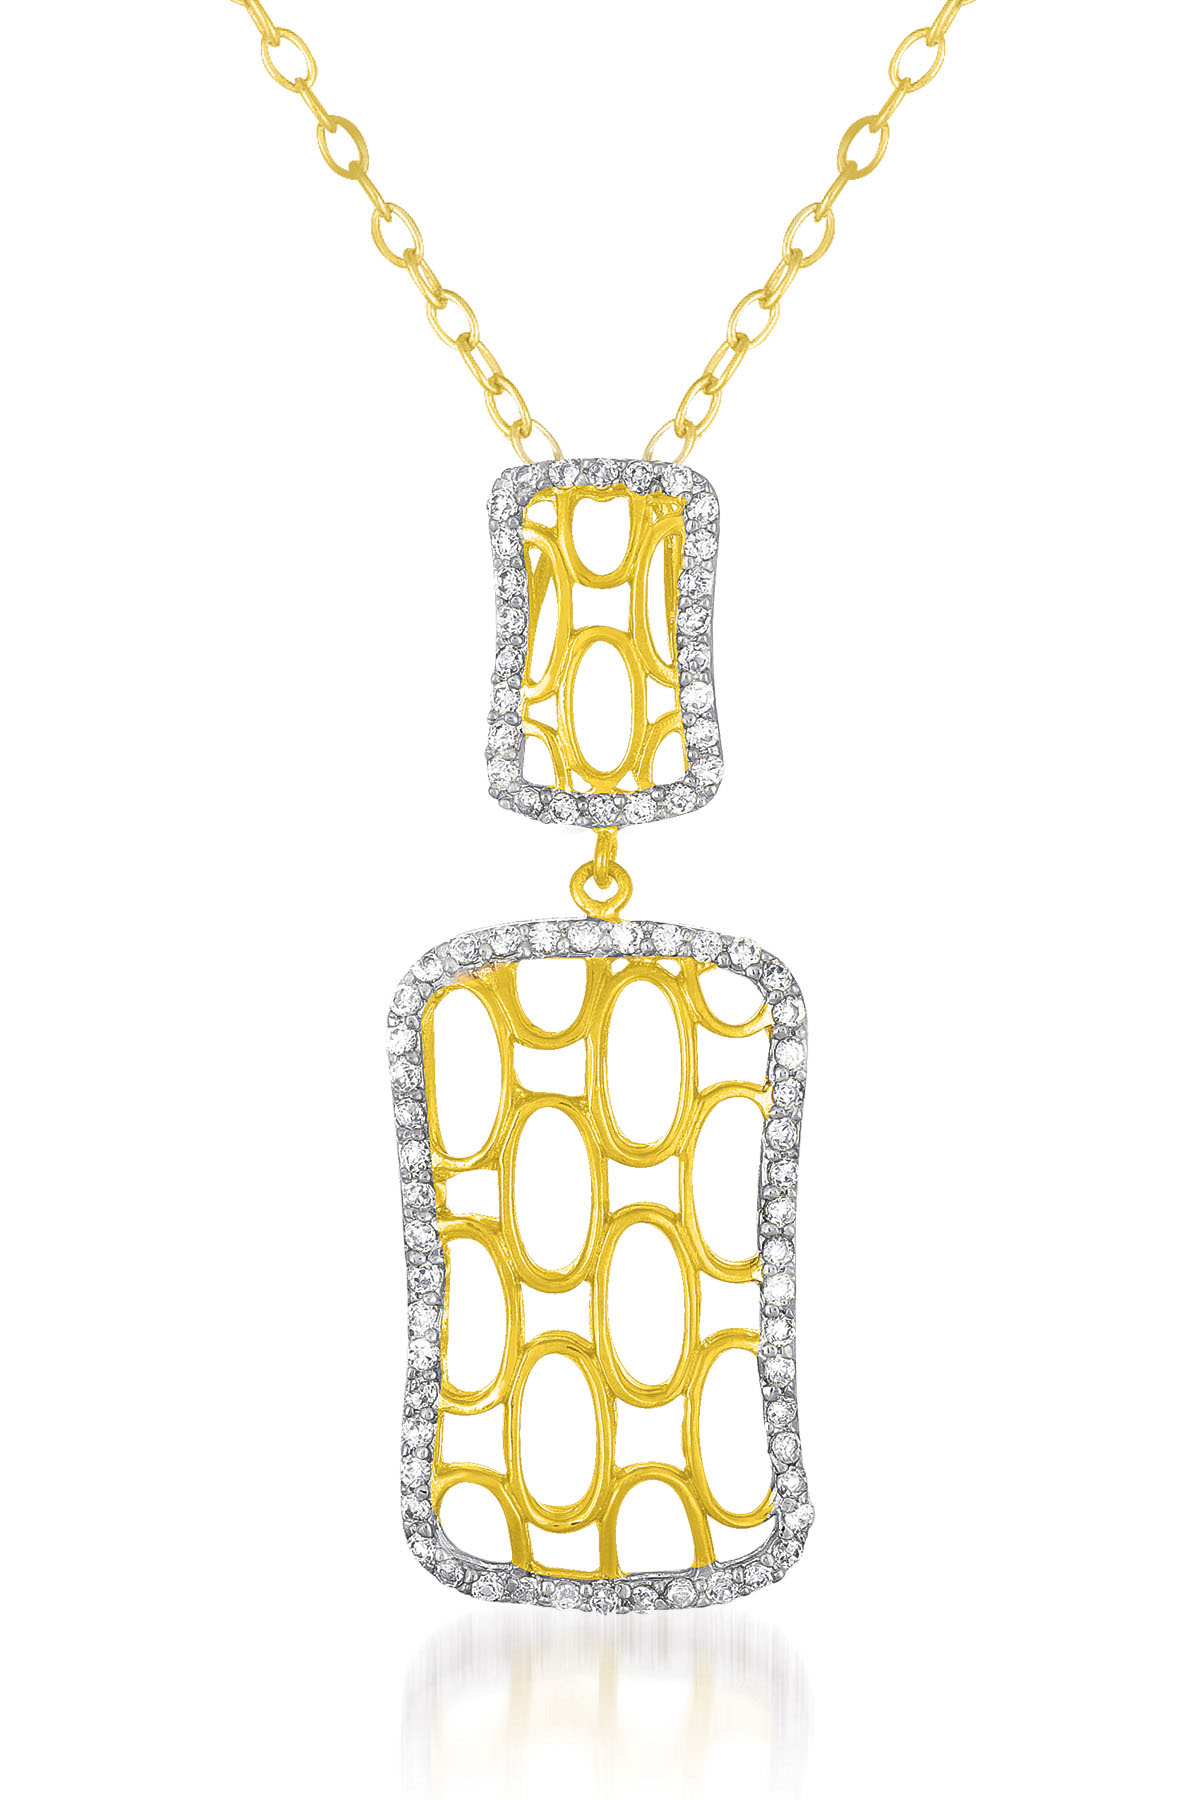 Cubic Zirconia (.925) Sterling Silver Two Tone Square Drop Pendant